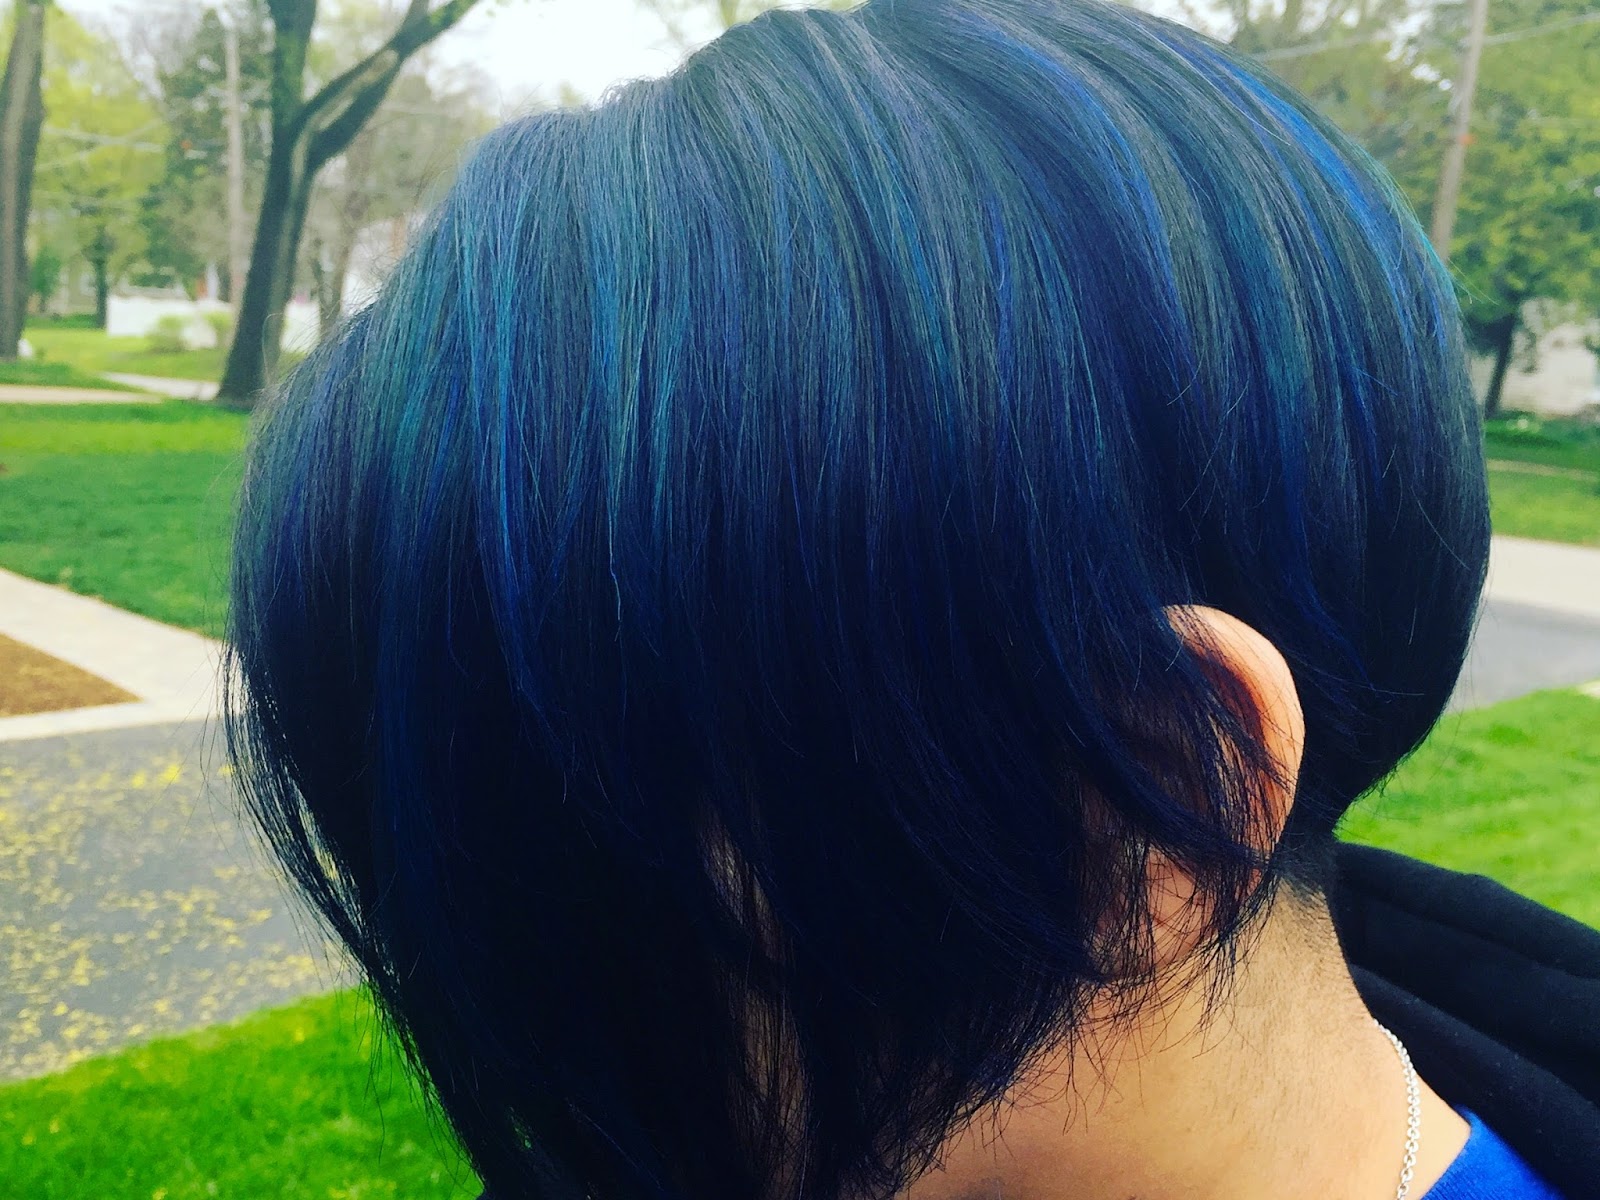 1. "How to Achieve Deep Royal Blue Hair Color at Home" - wide 4